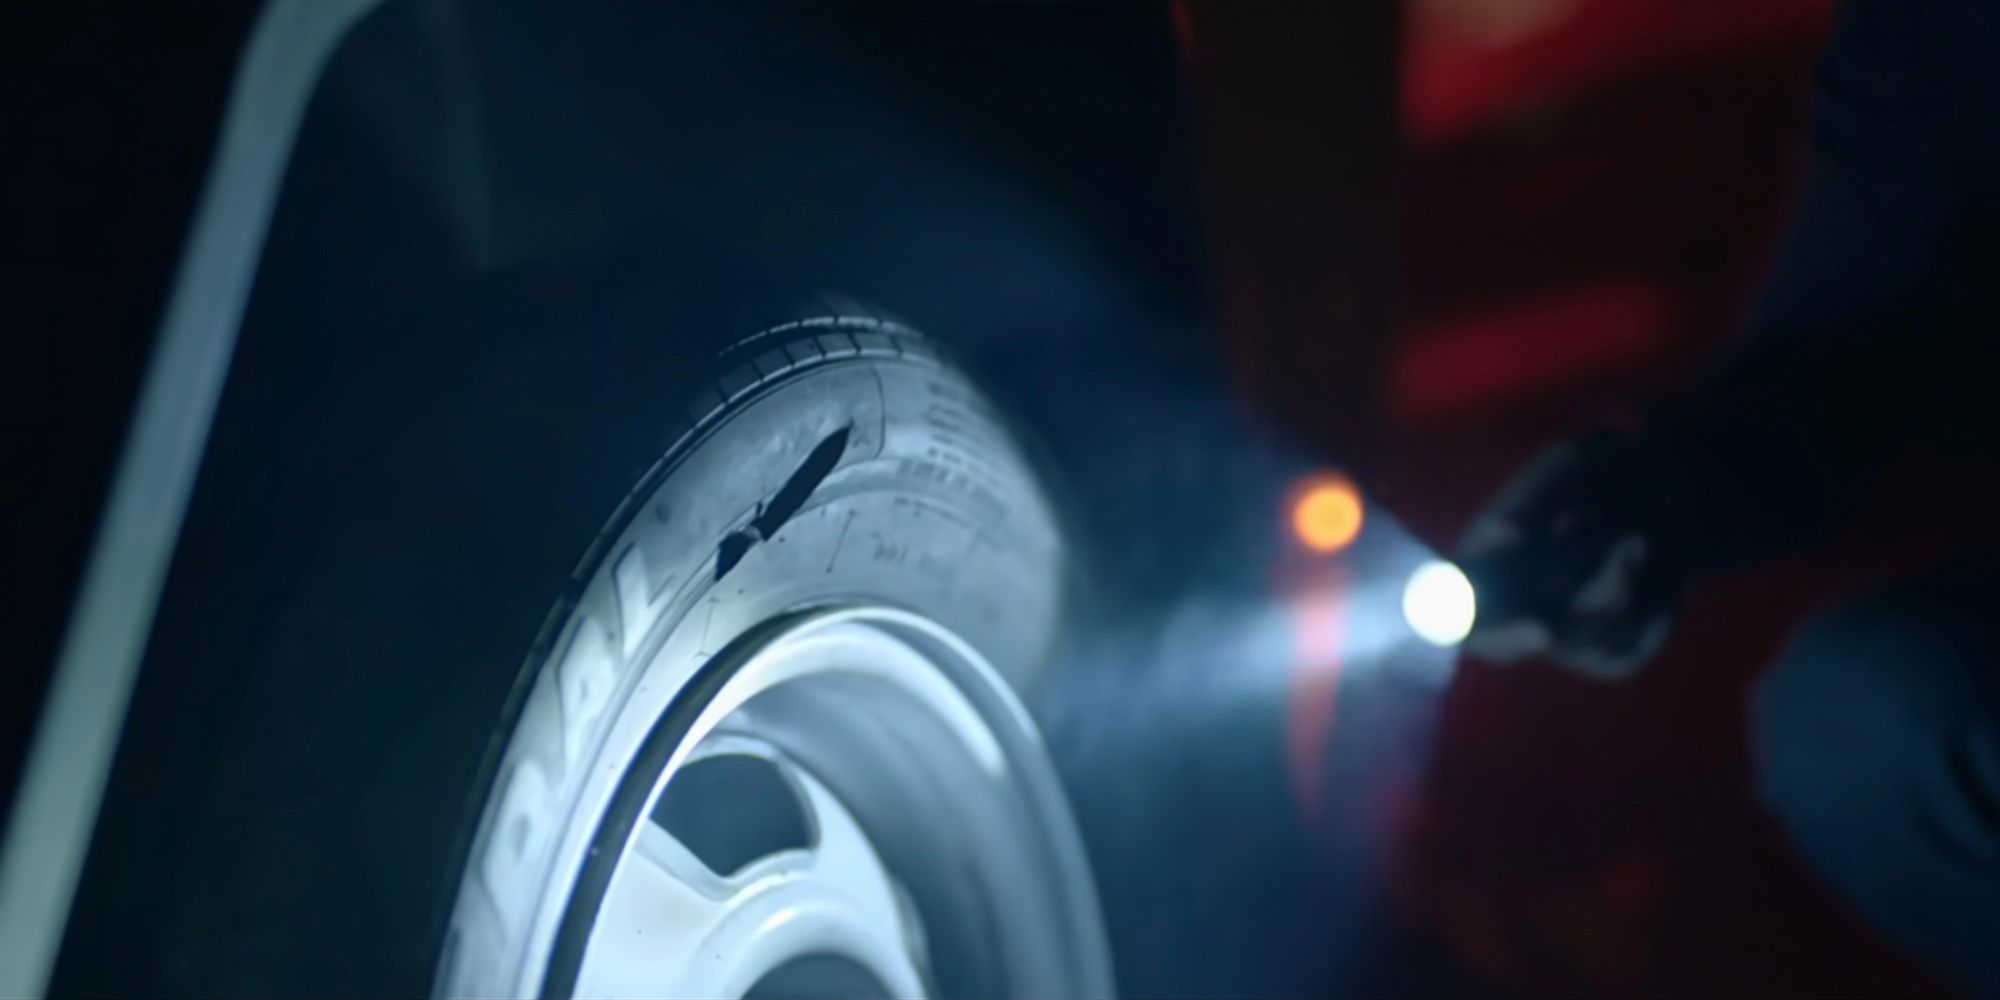 A flashlight is flashed on a slashed tire in Alone (2020).